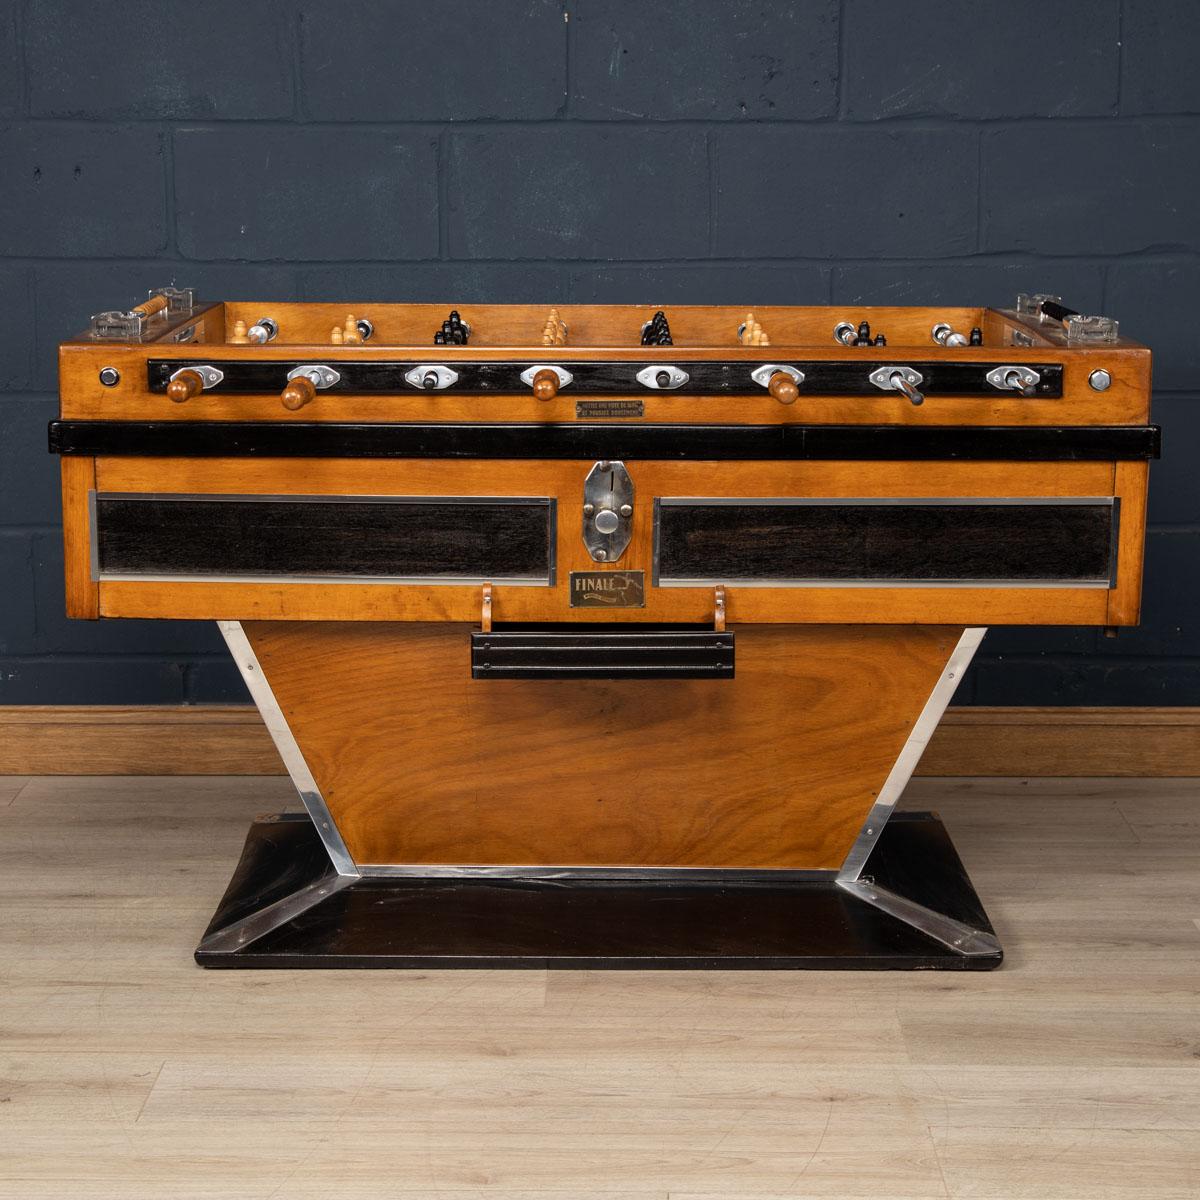 Beautiful French table football game (also known as a foosball table), early to mid 20th century. Painted and varnished wood and chromium plated and other metals, each side with four wooden-handled rods, the footballers of painted wood, a label to